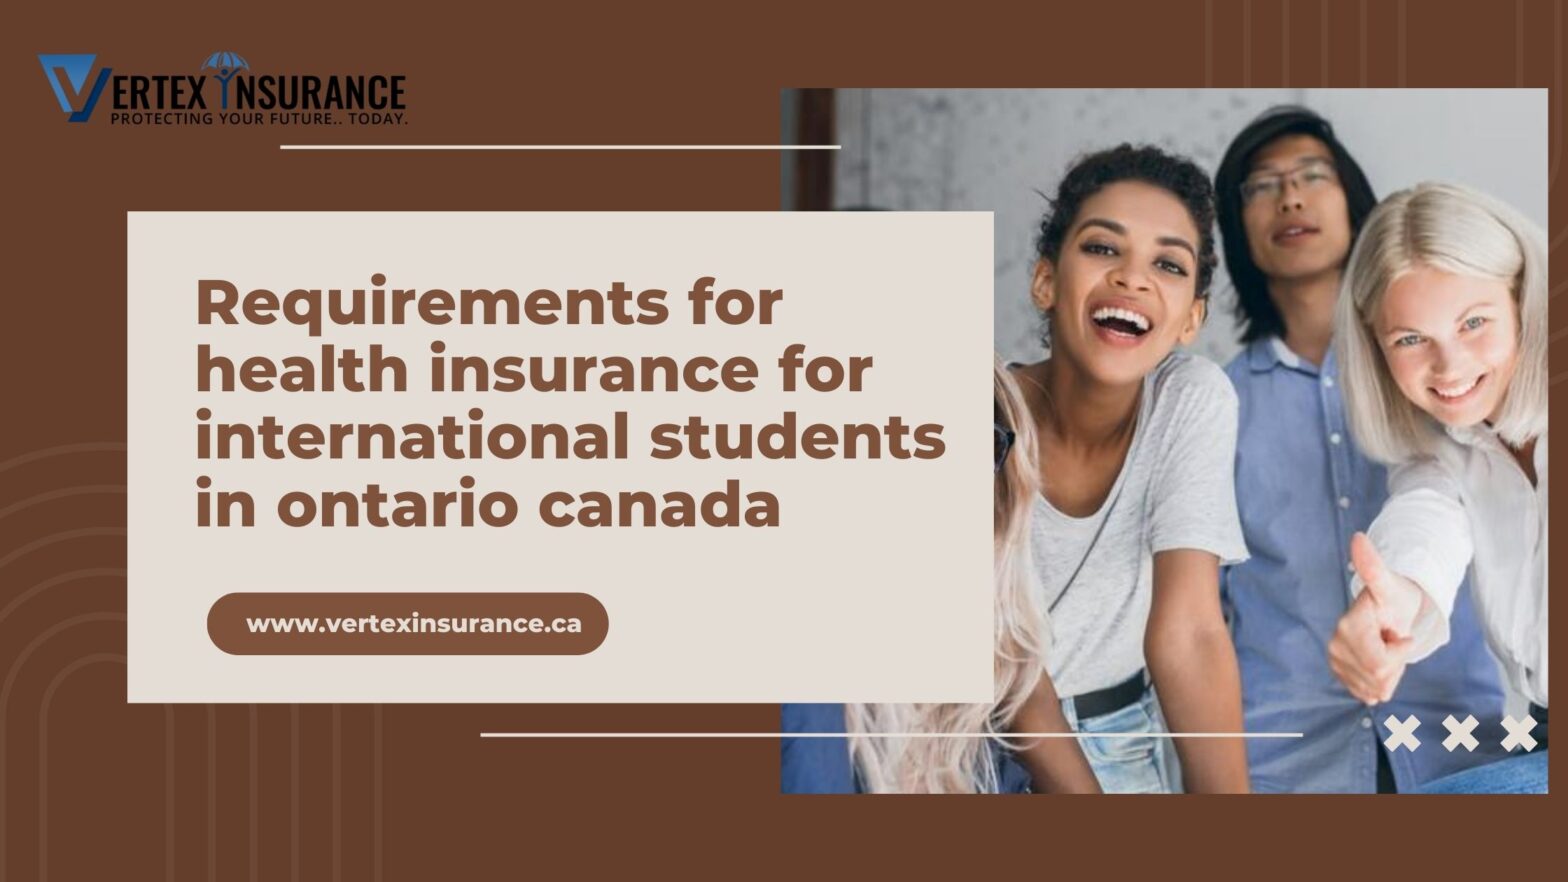 Requirements for health insurance for international students in ontario canada